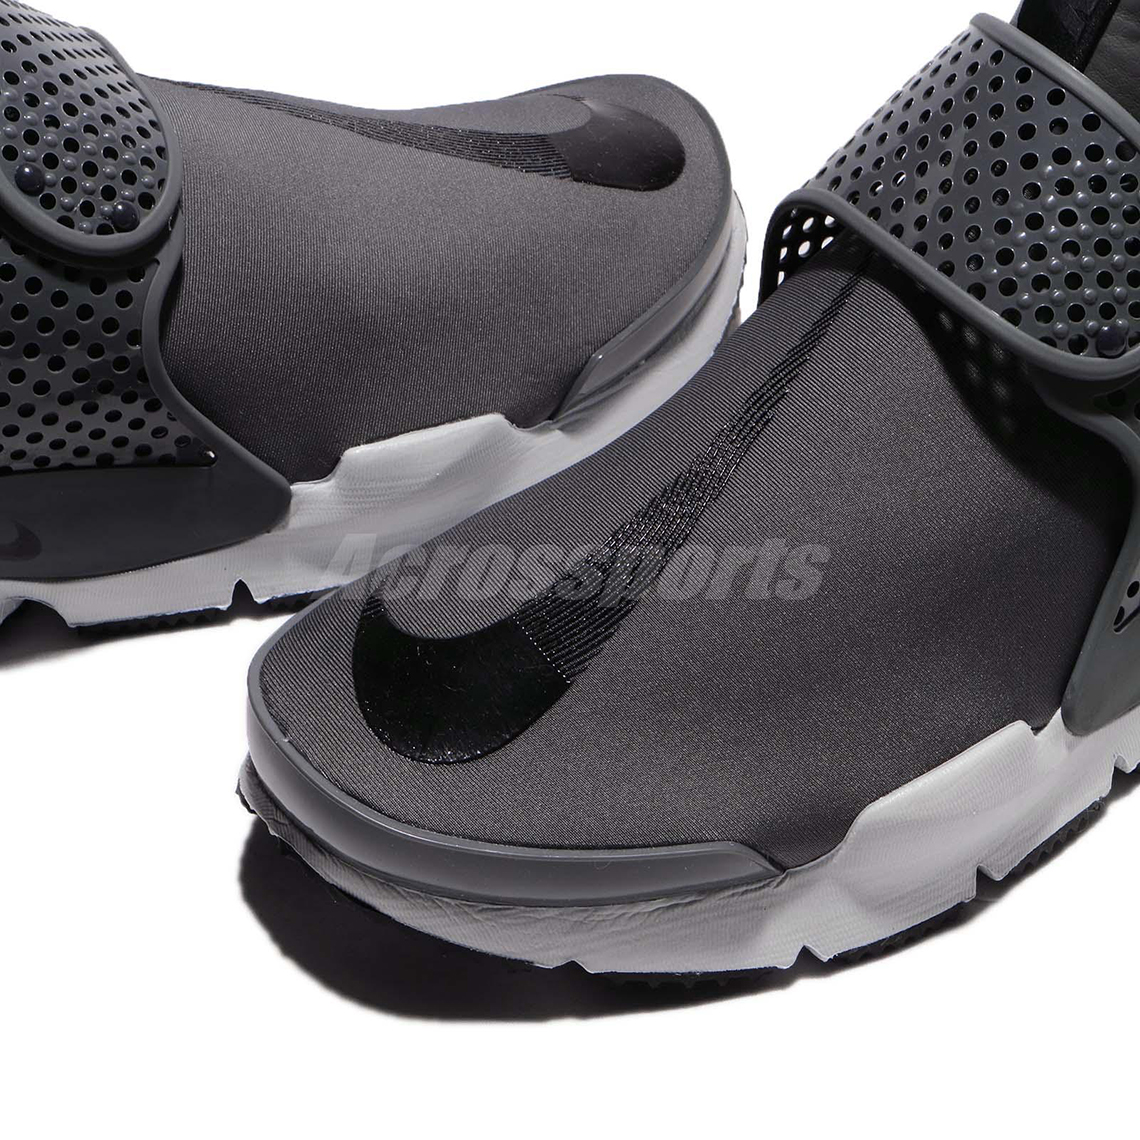 nike-sock-dart-mid-anthracite-924454-003-available-now-8.jpg